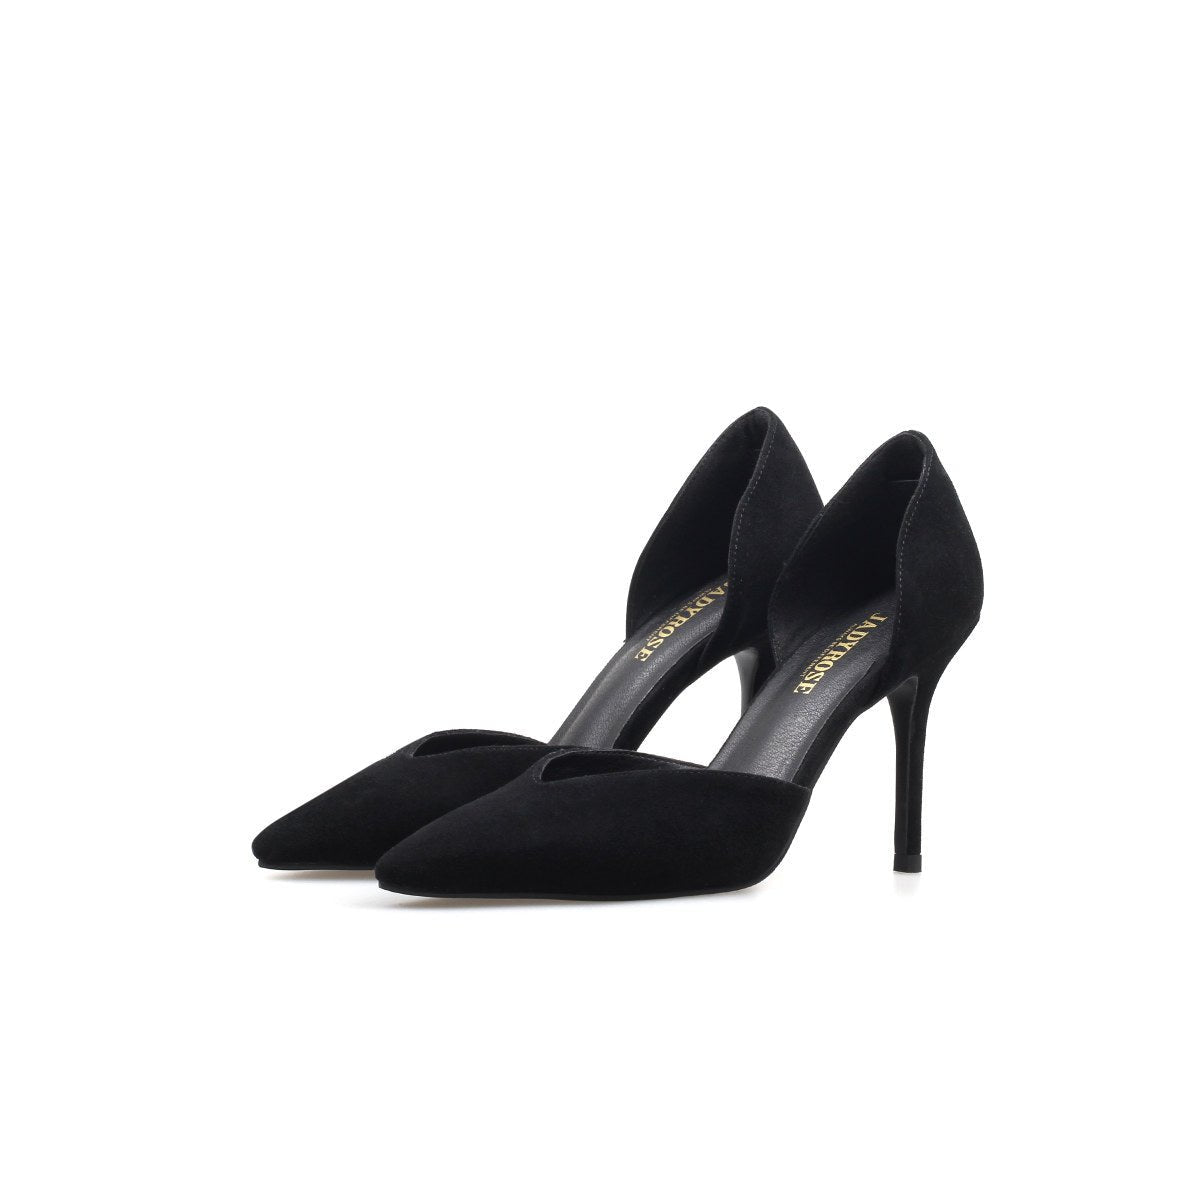 Covered Cup Cut-Out Stiletto Leather Black Pump - 0cm